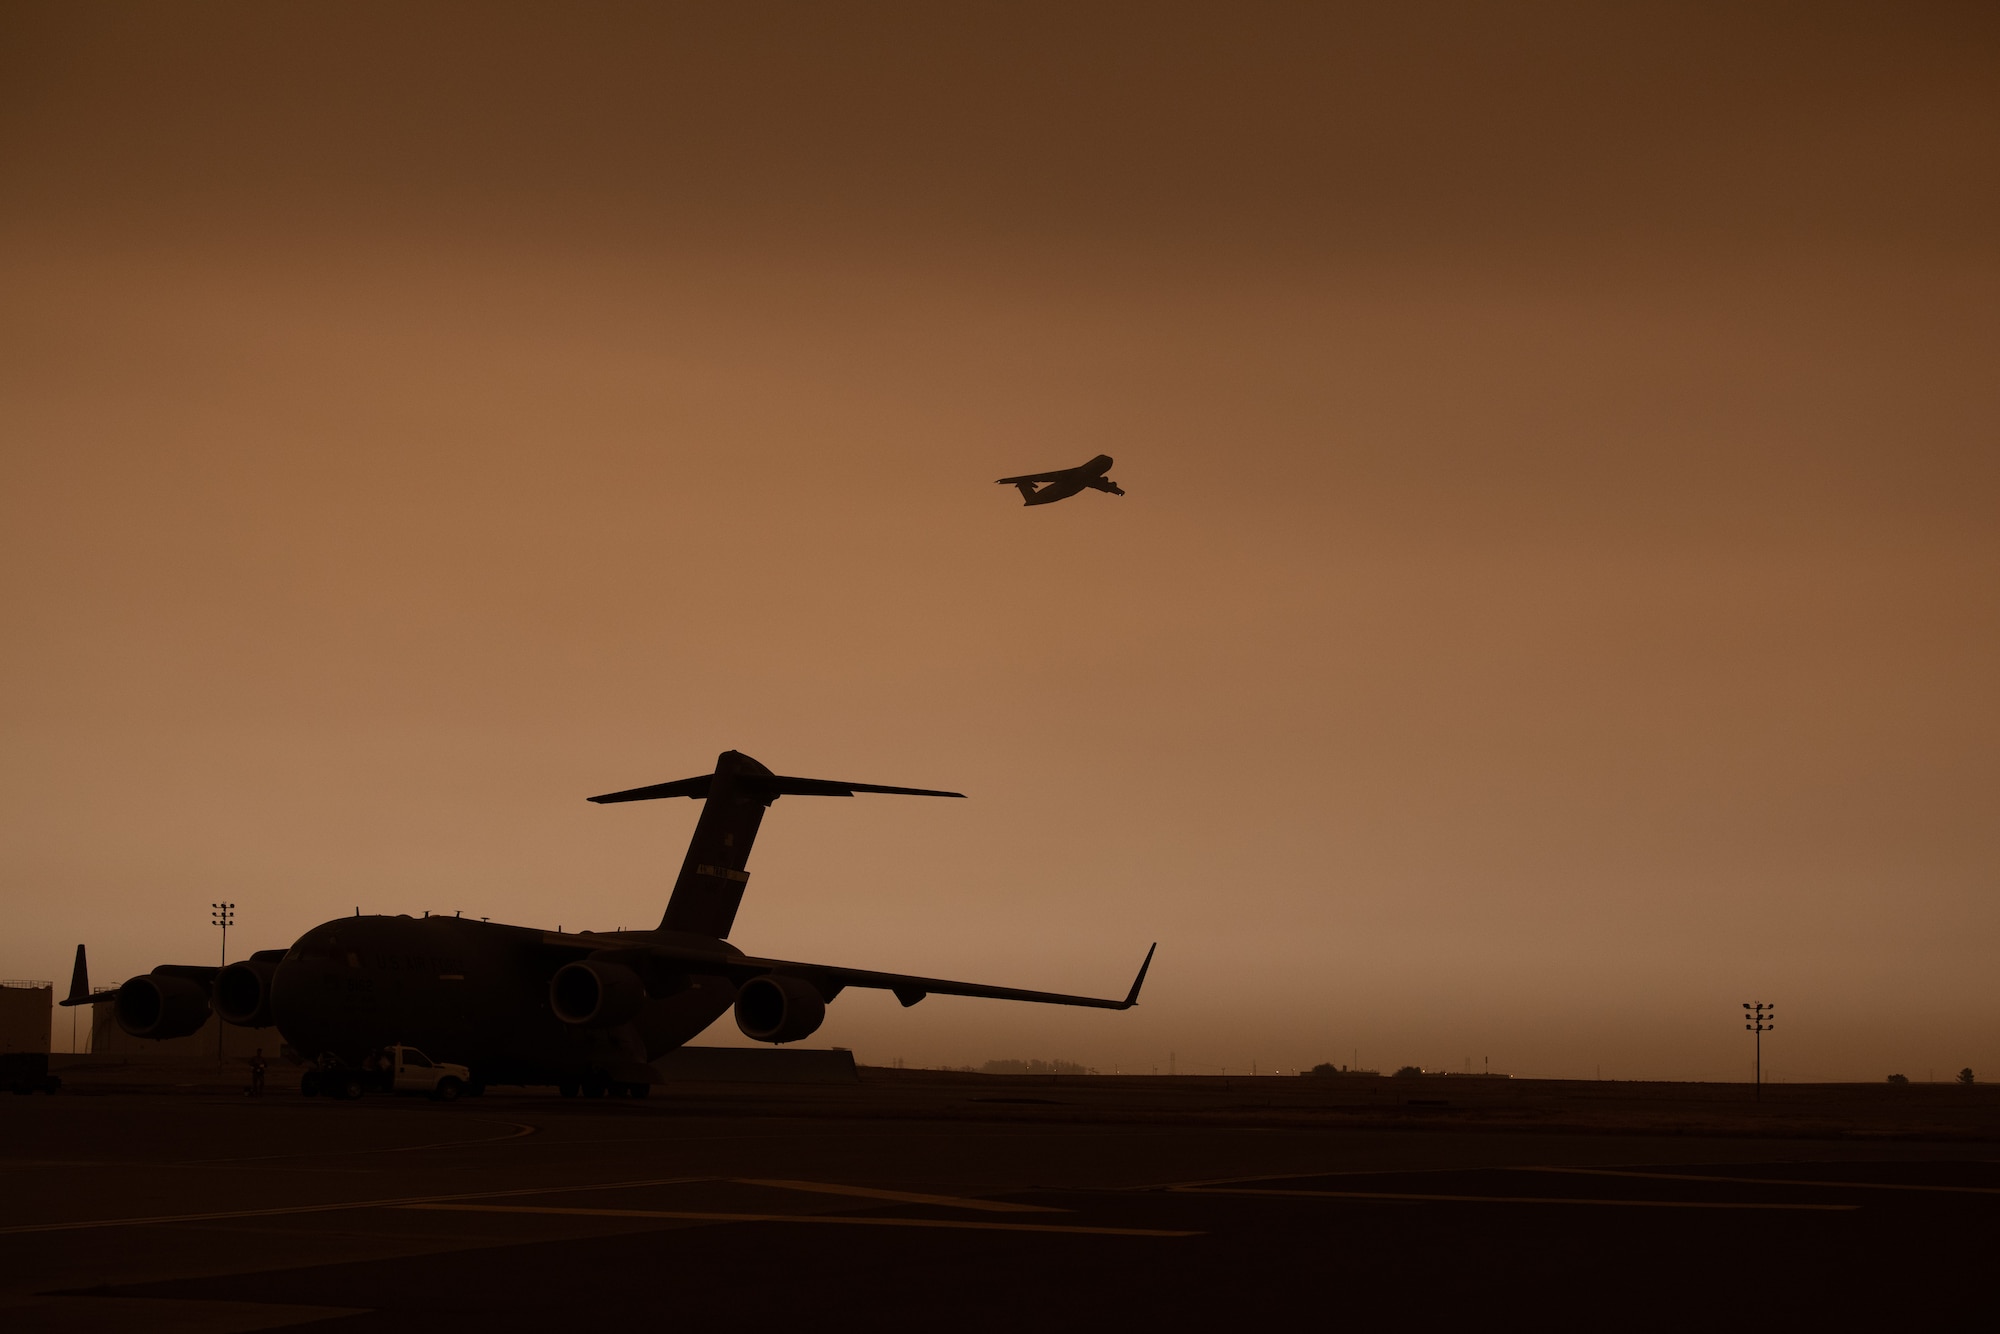 A C-5M takes off on the flight line with a yellowish, smokey sky.